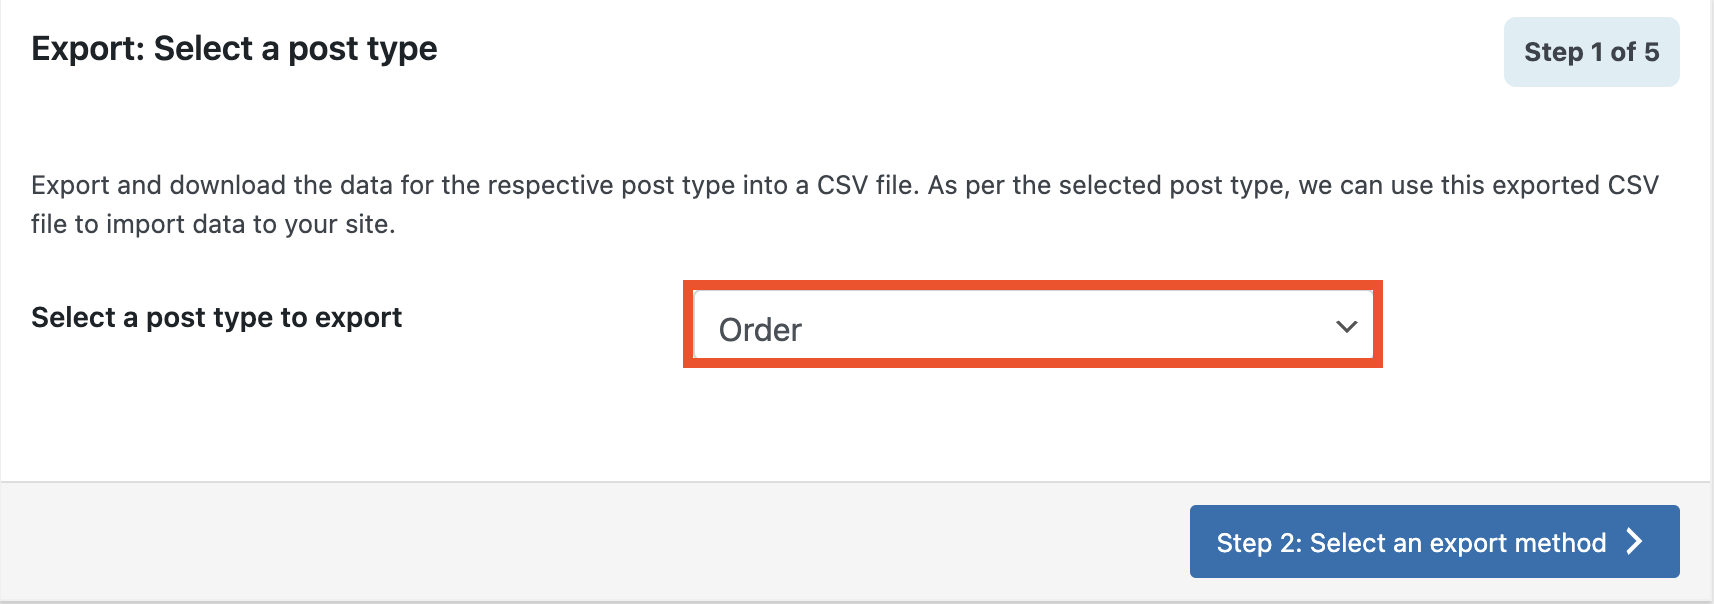 Select Order as the post type to export